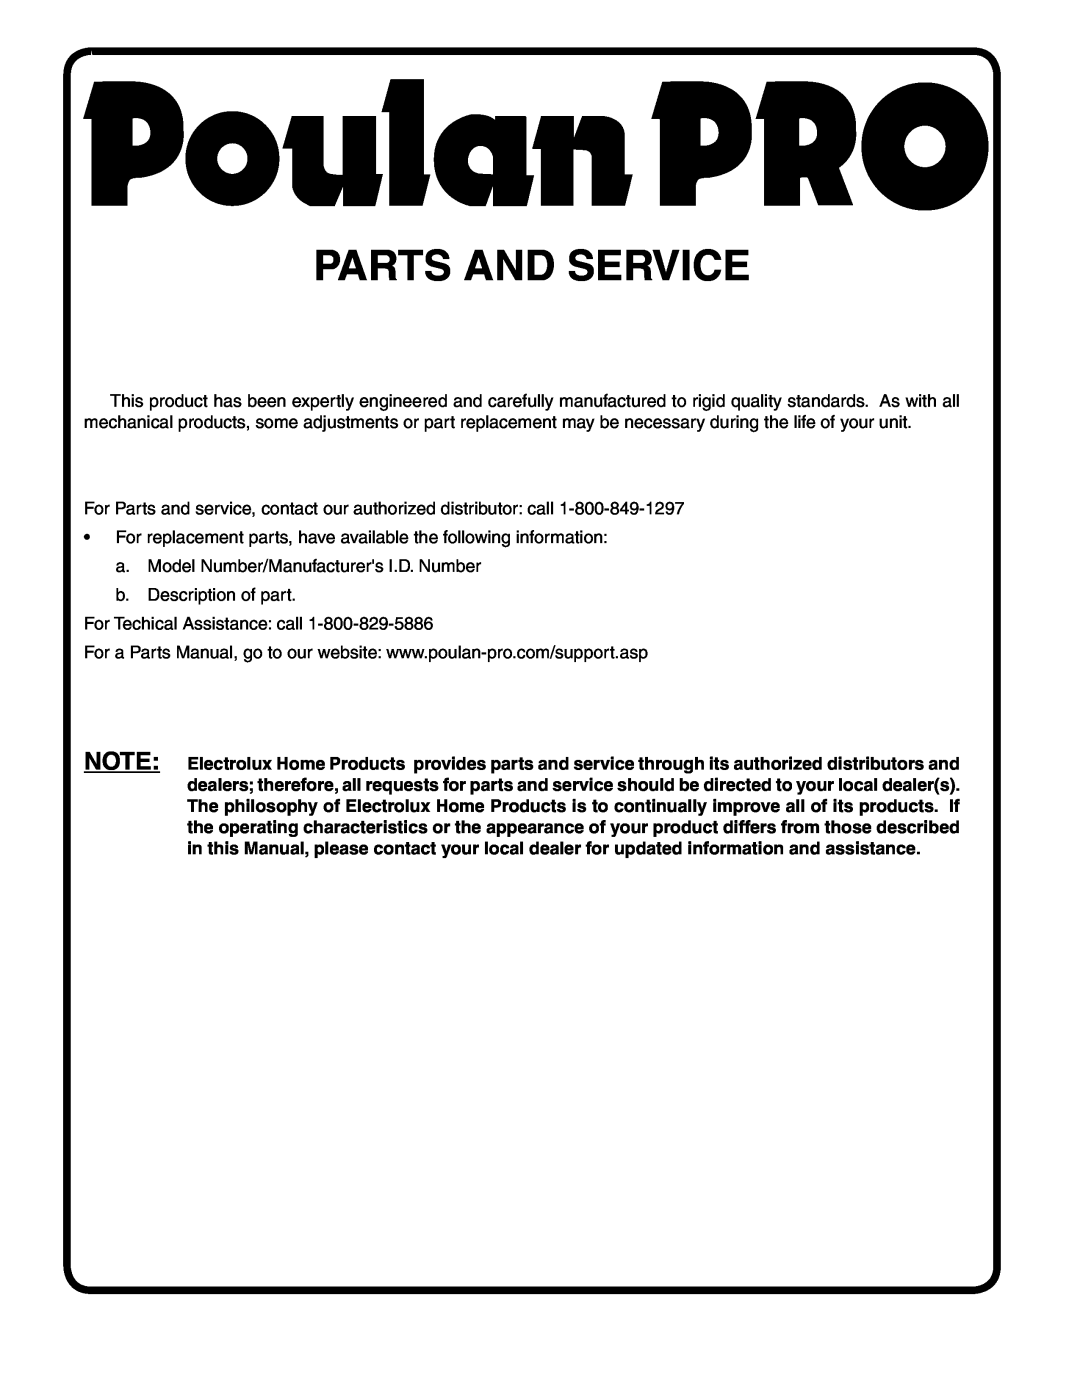 Poulan 195021 manual Parts And Service 